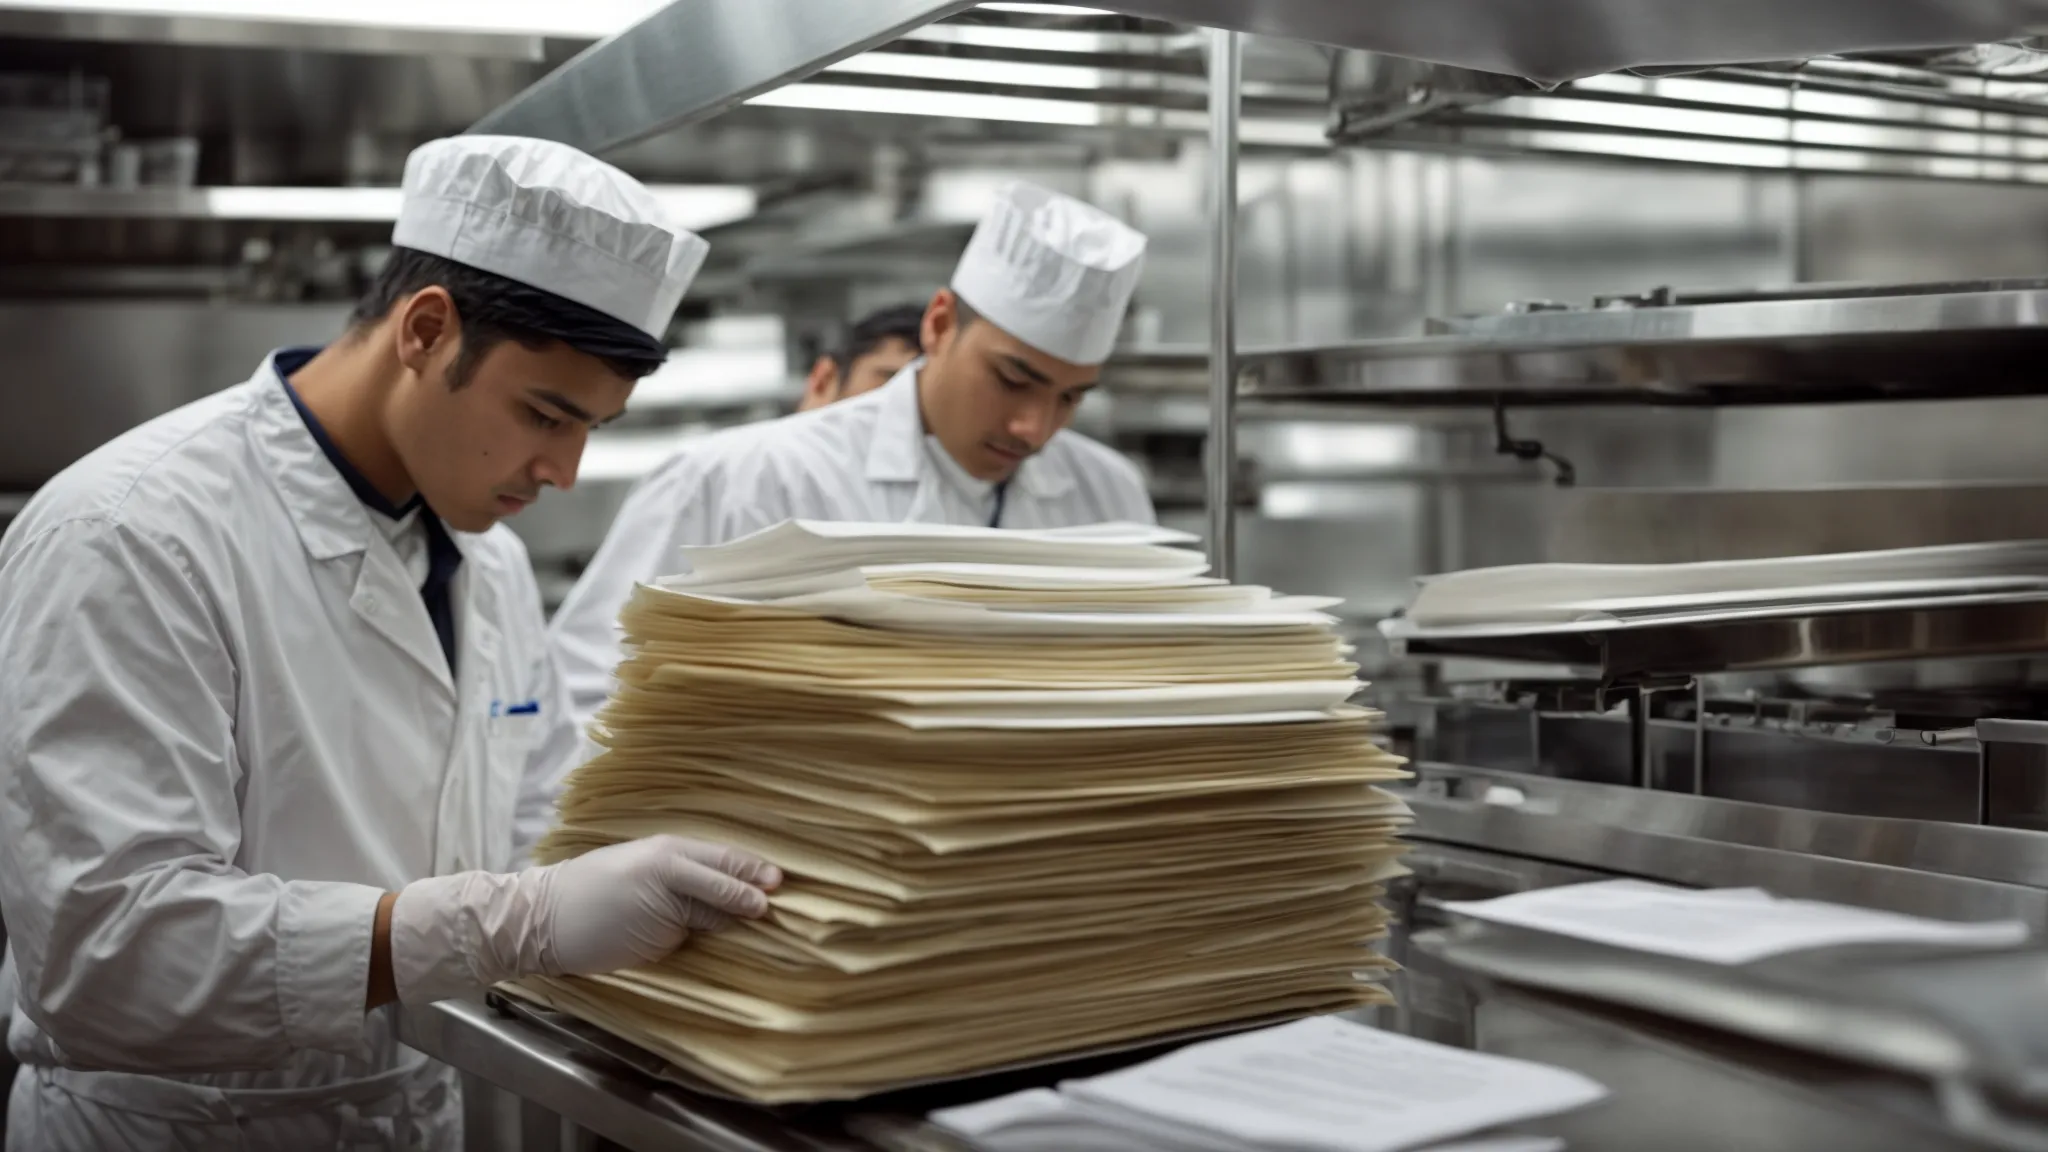 a commercial kitchen team reviews a folder of compliance documents next to a professionally cleaned exhaust system.